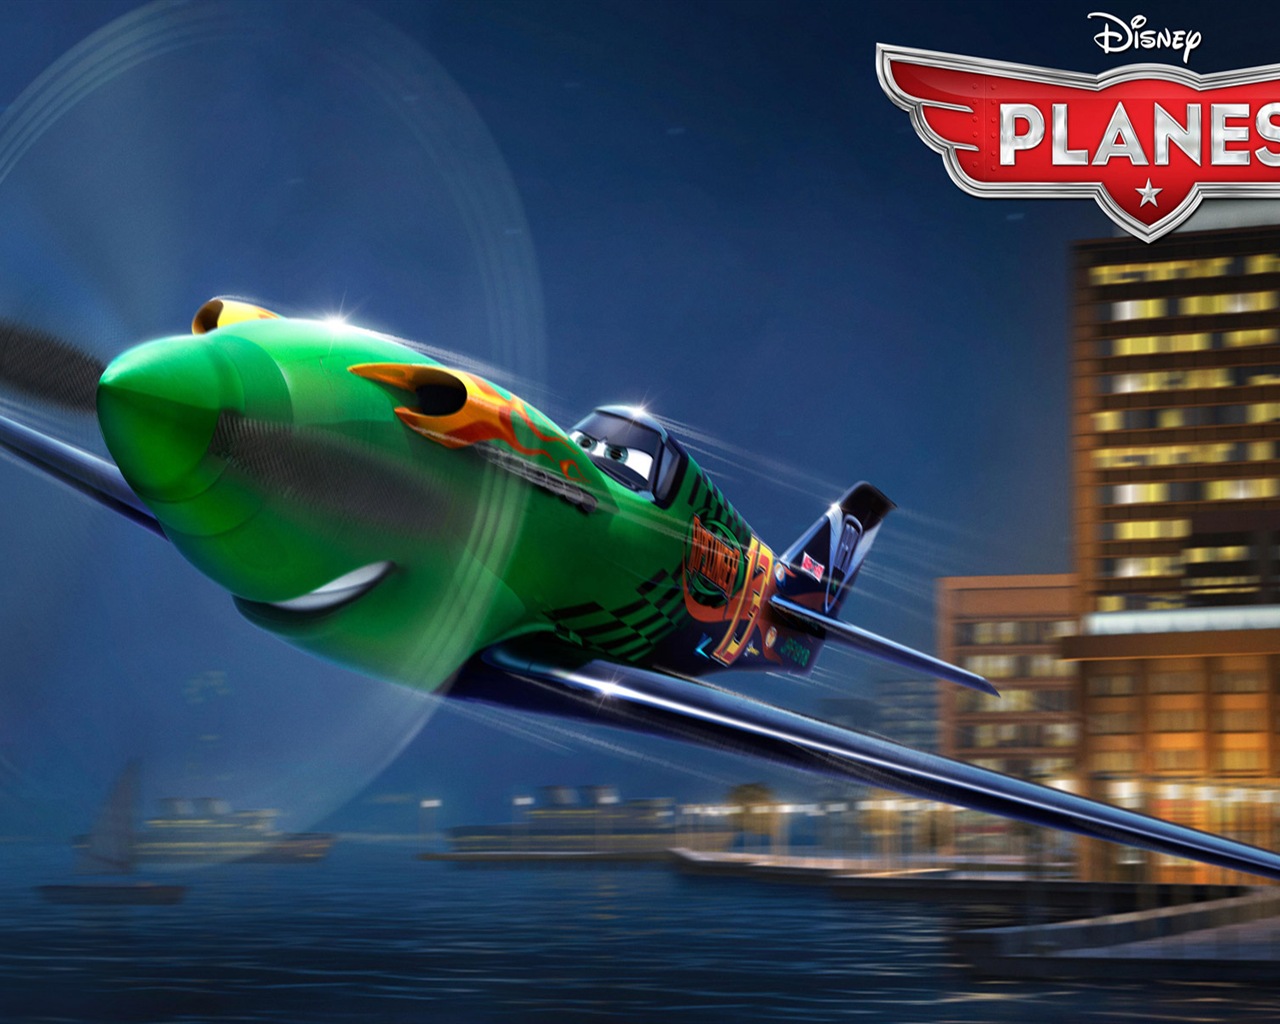 Planes 2013 HD wallpapers #14 - 1280x1024